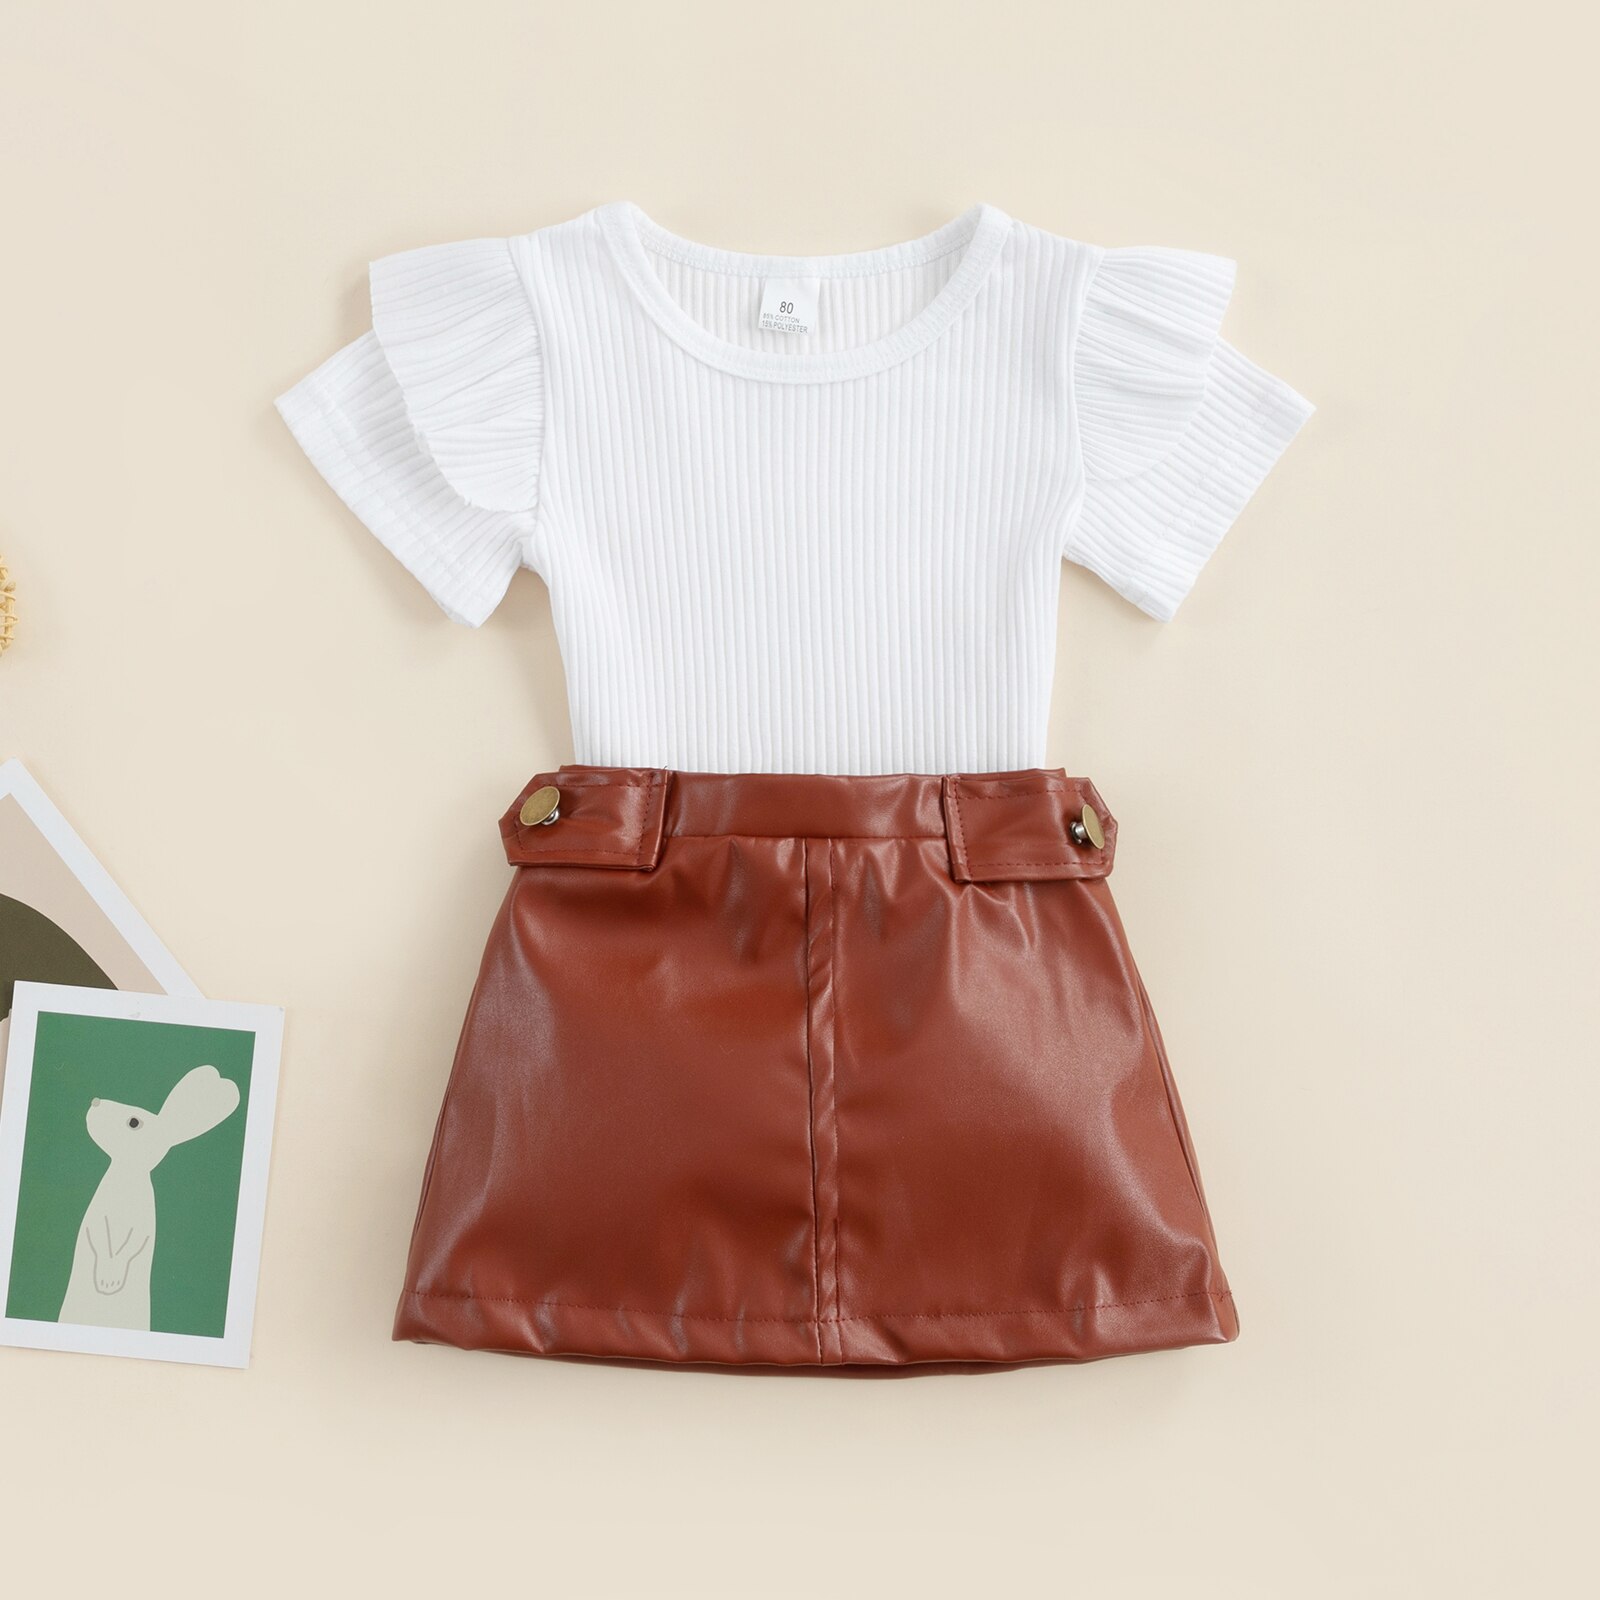 Citgeett-Summer-Kid-Baby-Girl-Clothes-Set-Solid-Color-Ribbed-Short-Sleeve-T-shirt-PU-Leather-1